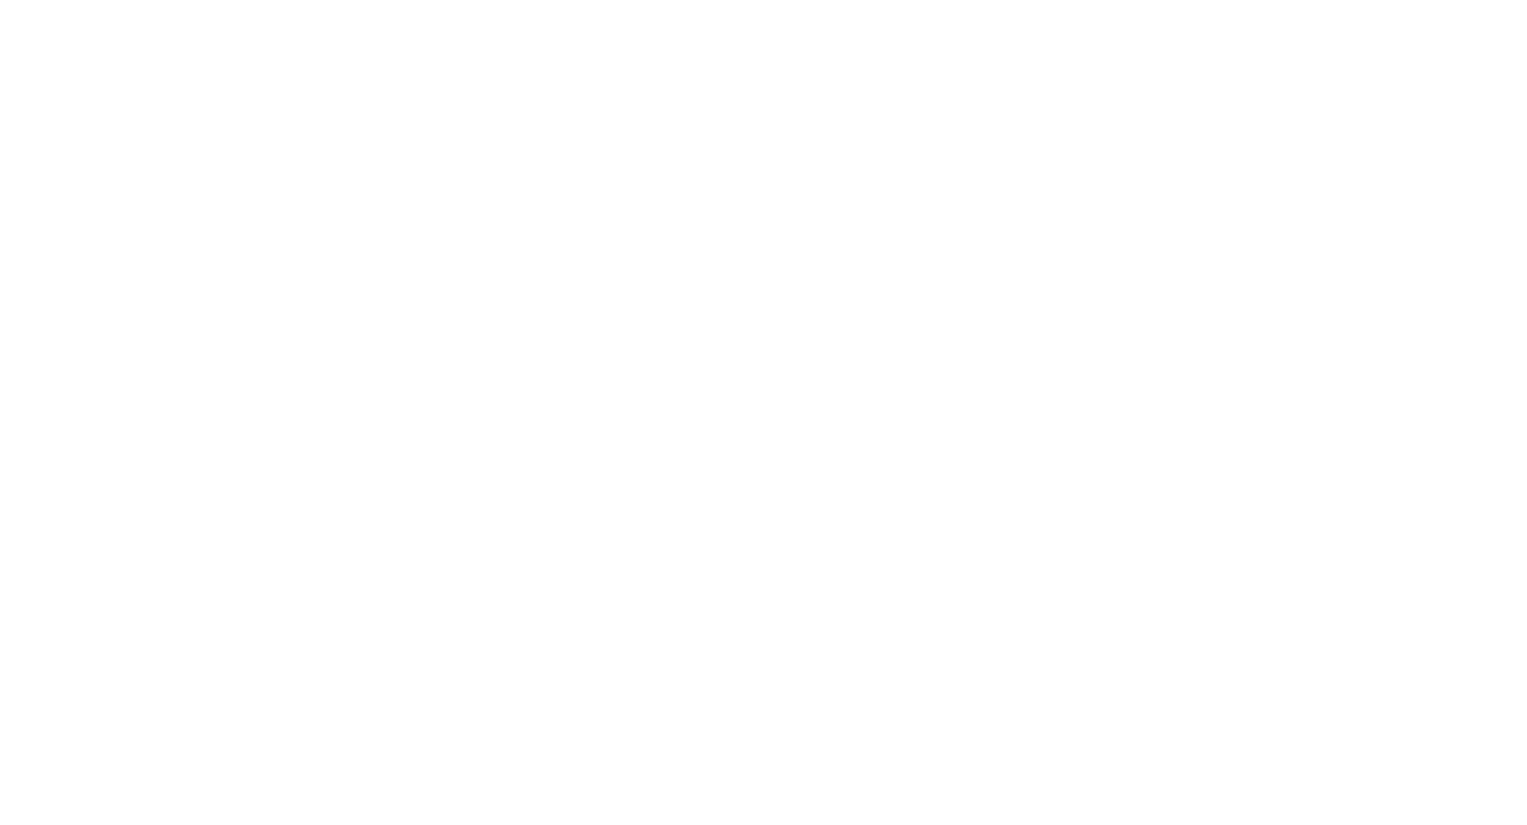 Go to the Department of Workforce Development Home Page